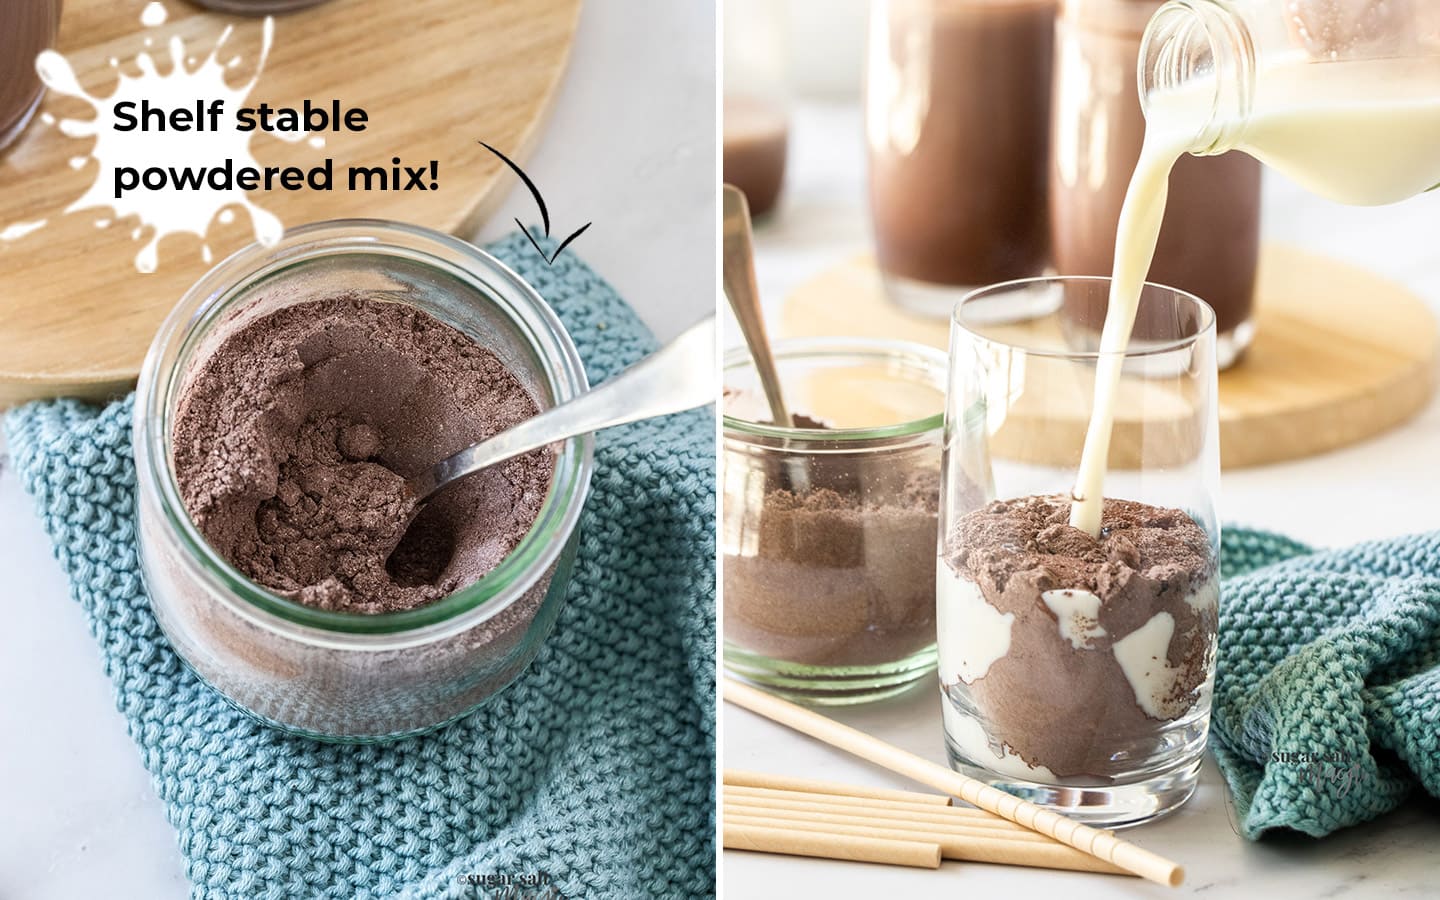 Two images showing chocolate milk powder and adding milk to it